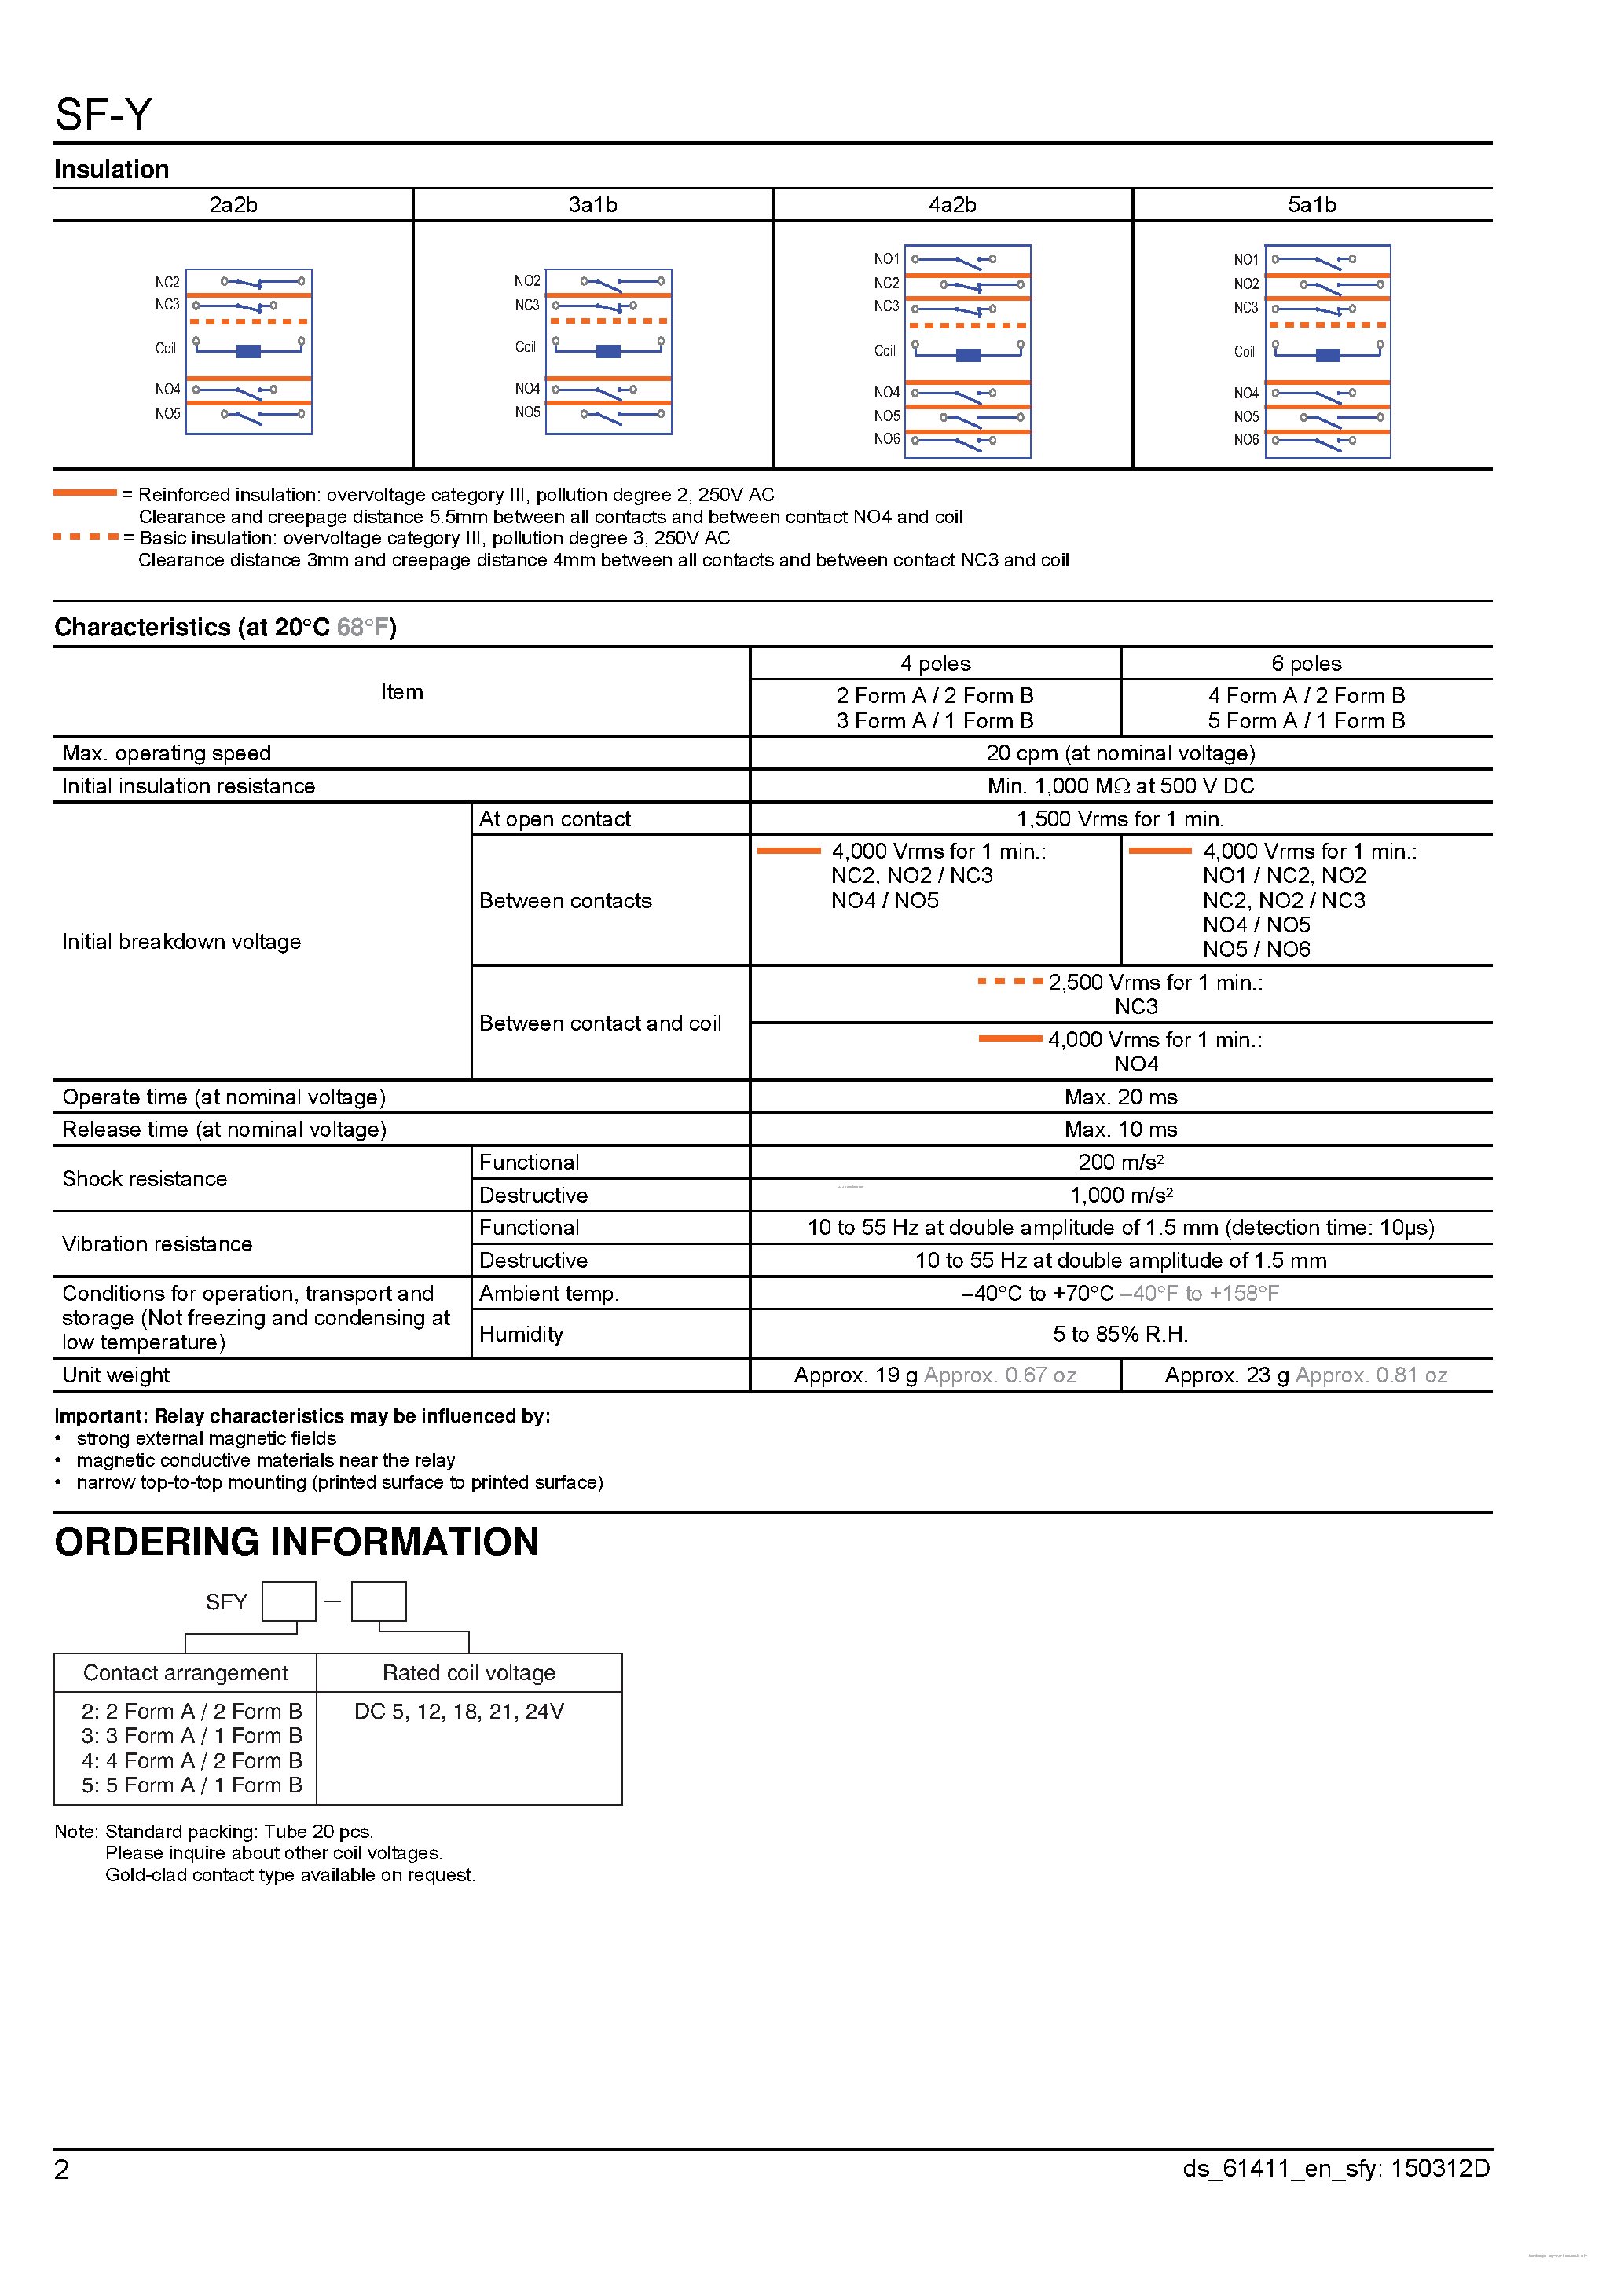 Datasheet SF-Y - Relay page 2